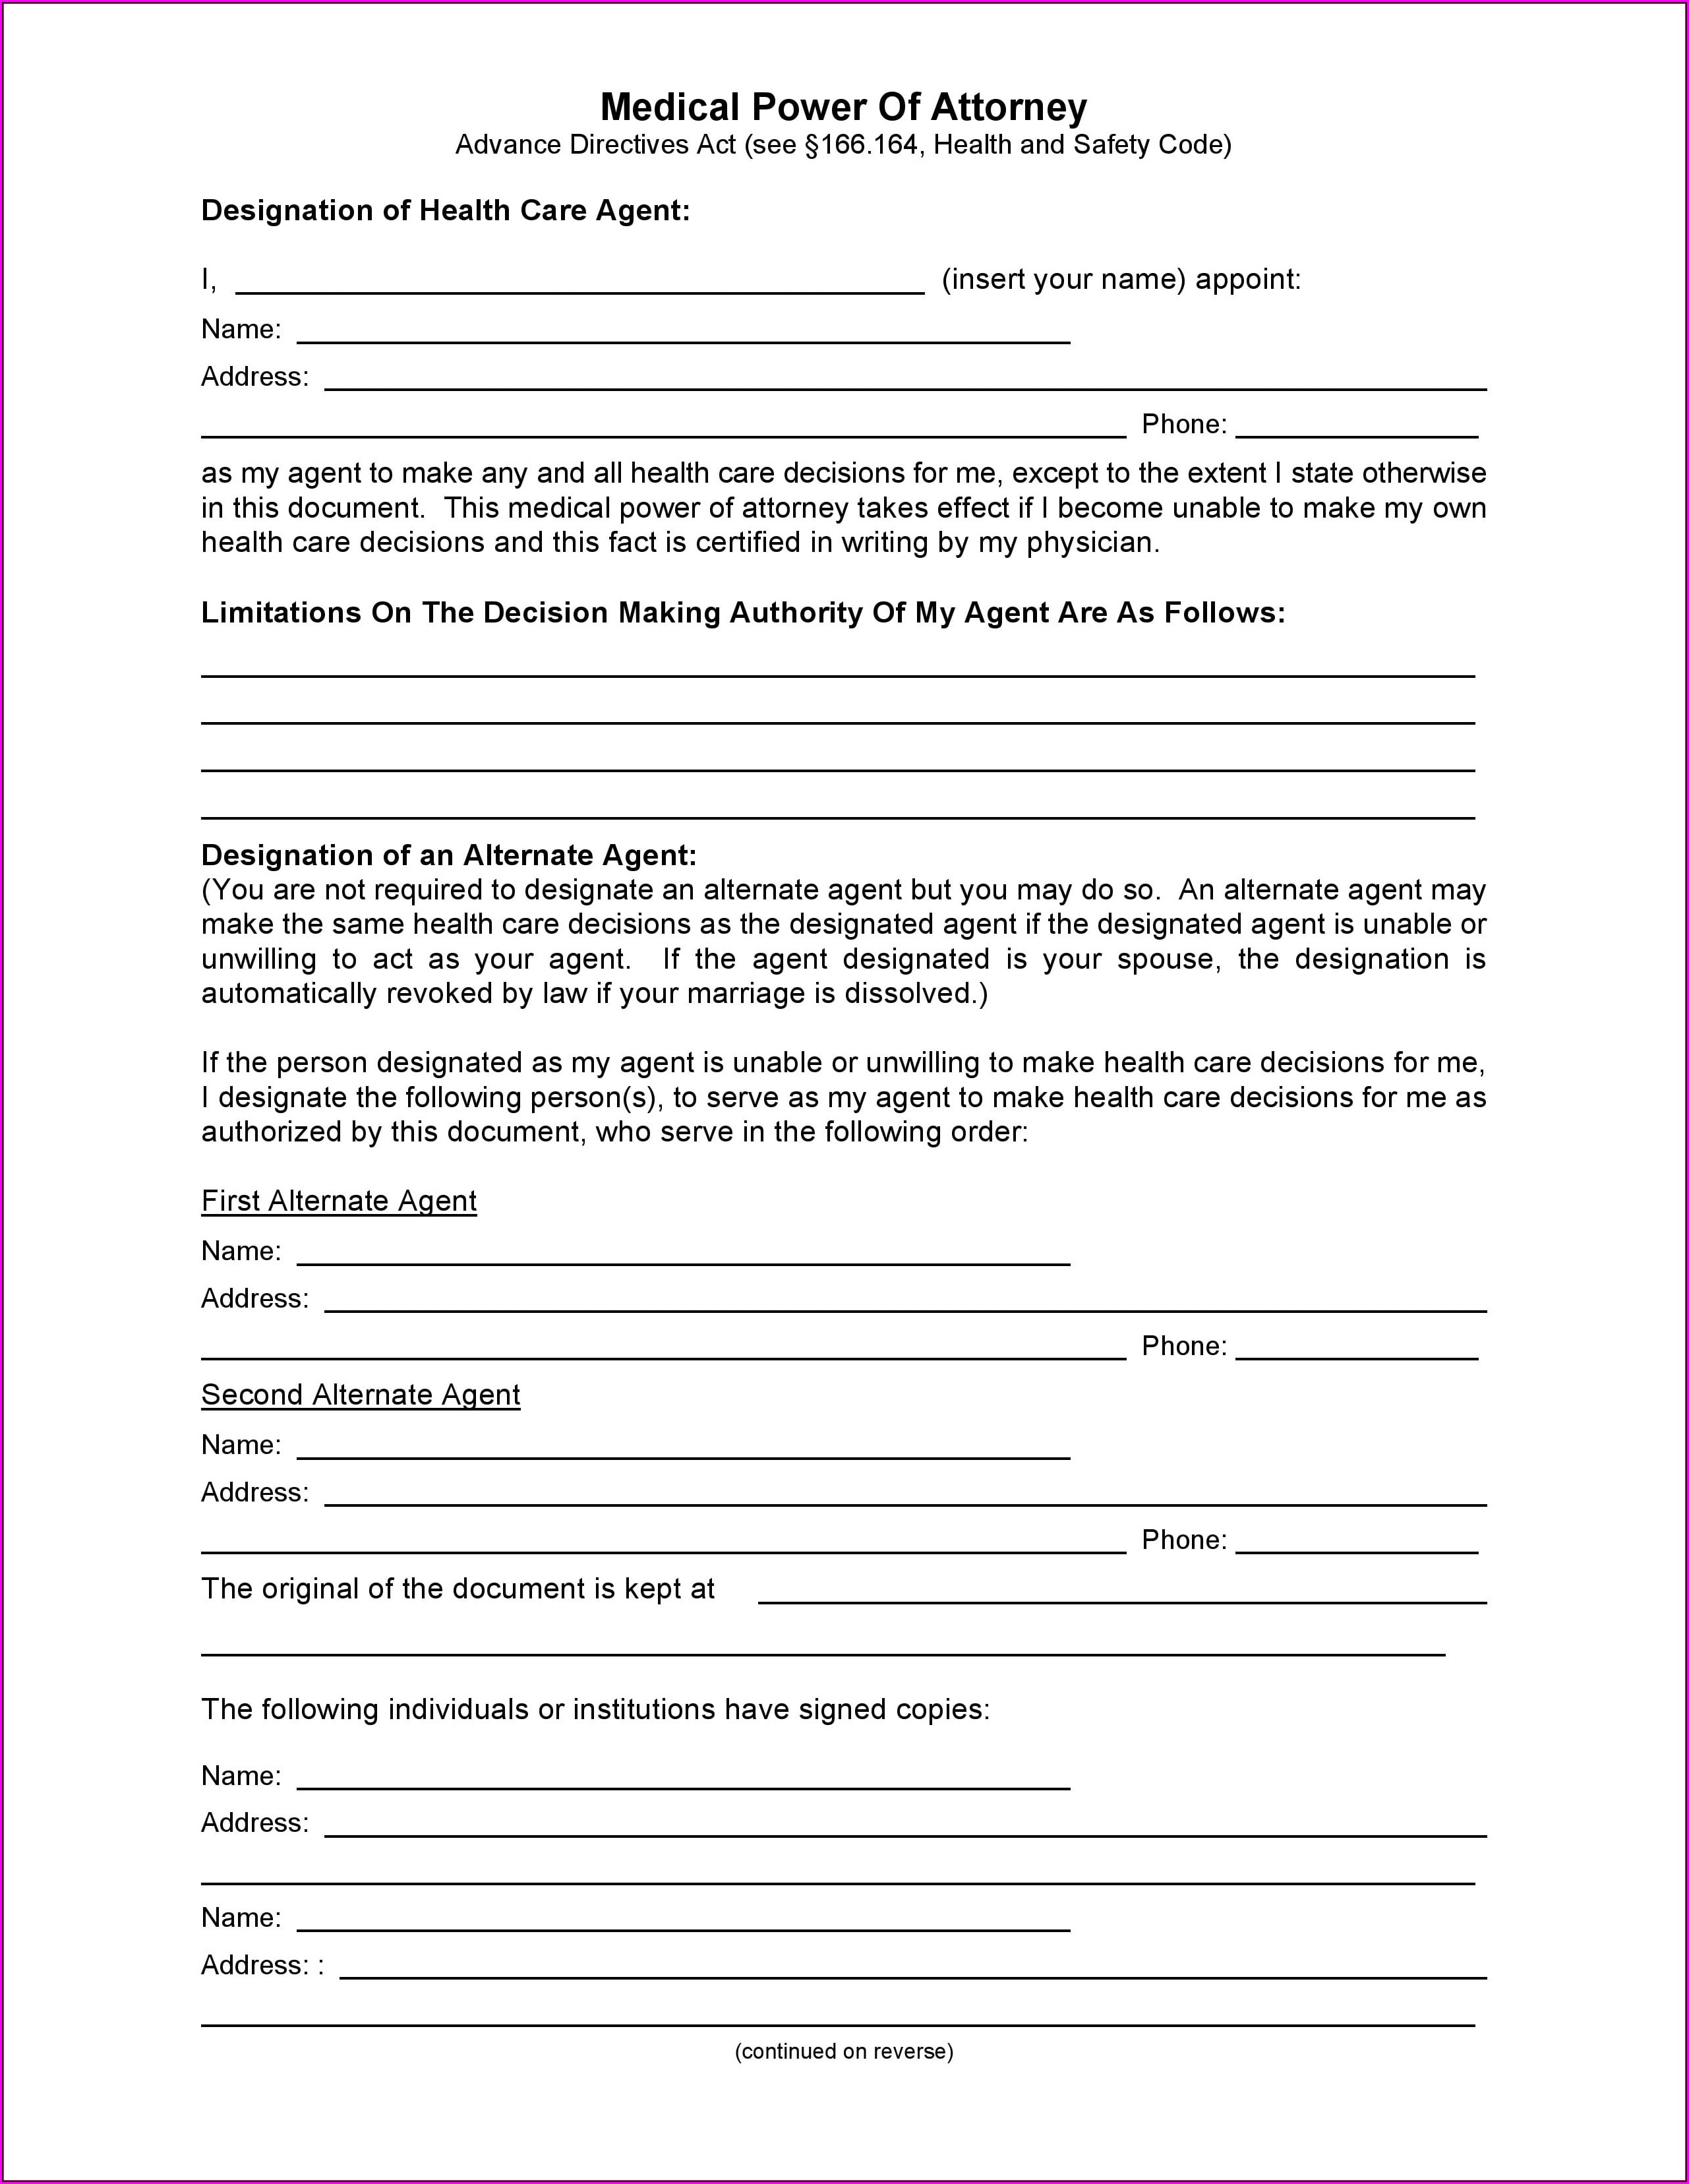 Medical Power Of Attorney Form Free Download